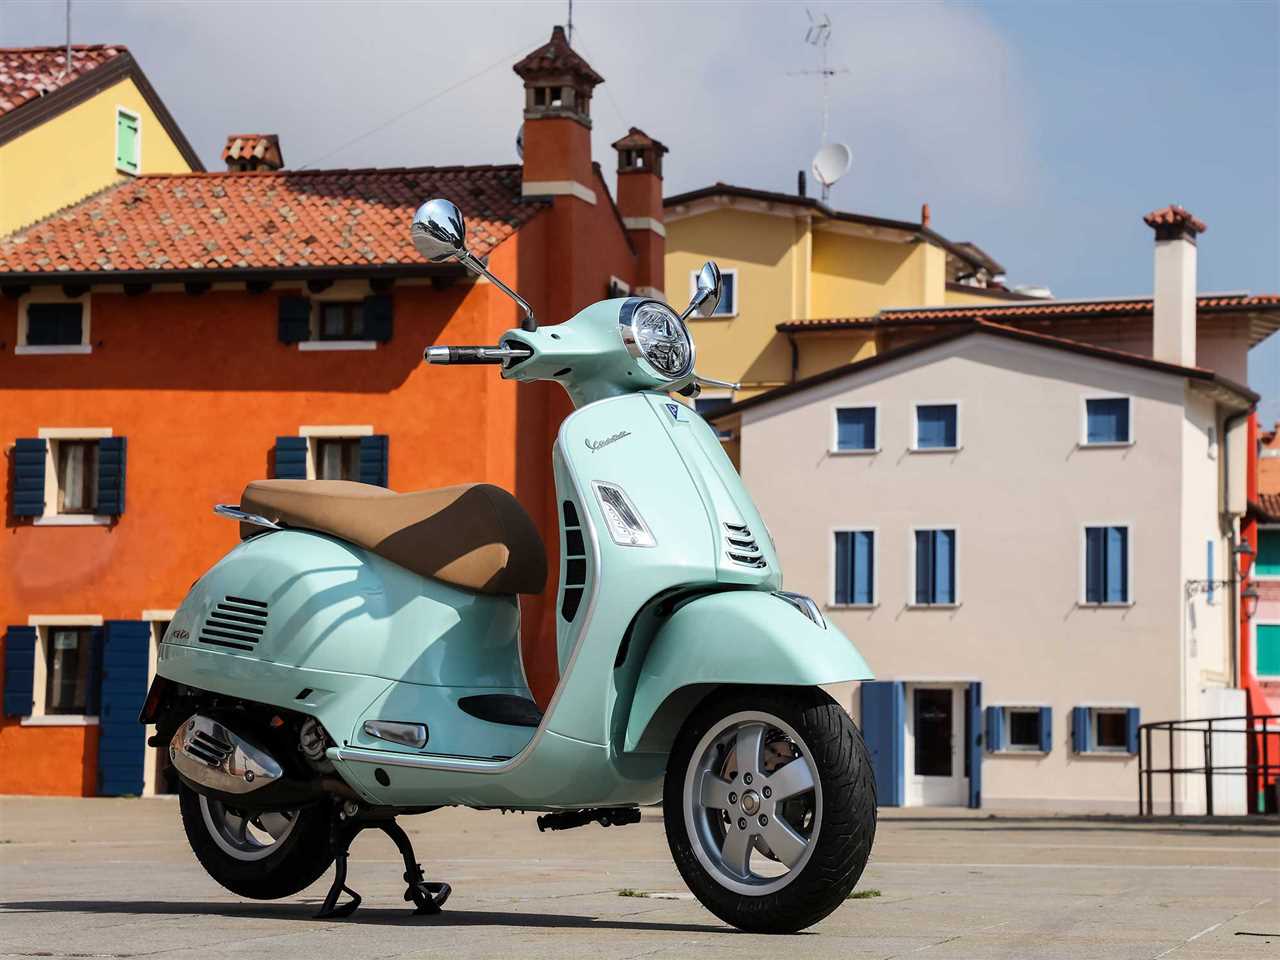 Vespa Type Scooters The Ultimate Guide to Stylish and Reliable Two-Wheelers